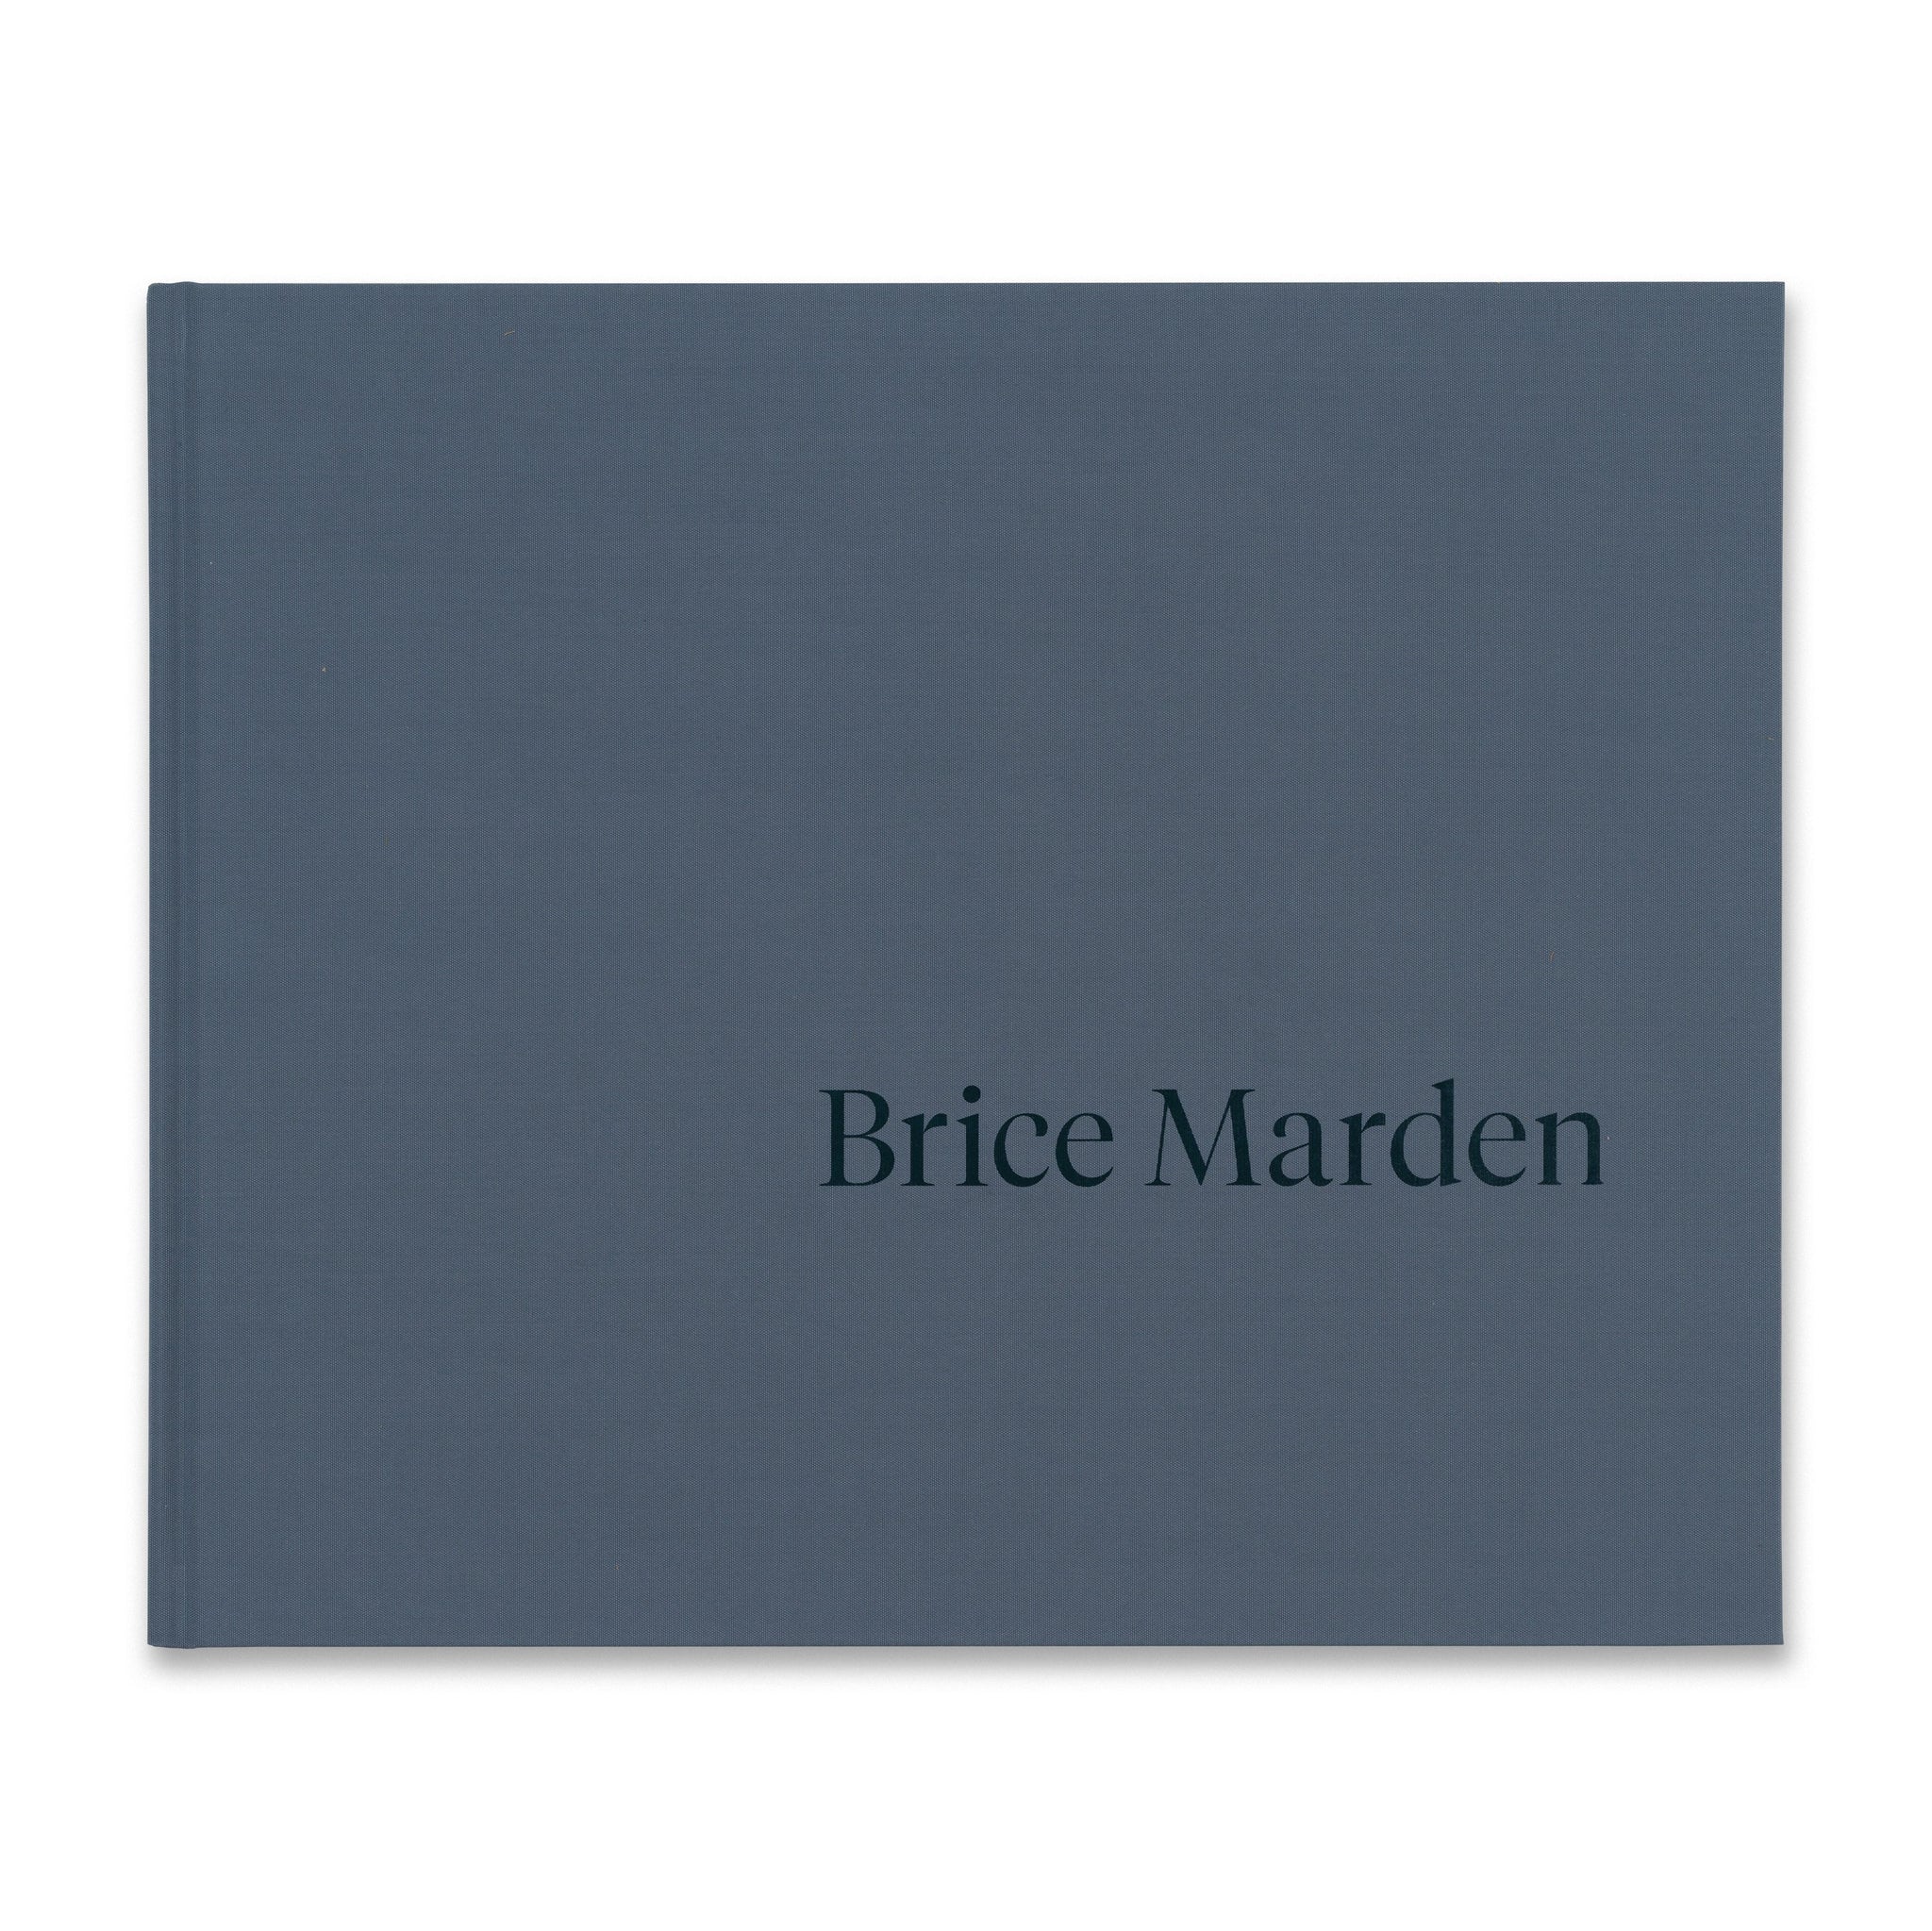 Cover of the book Brice Marden: It reminds me of something, and I don’t know what it is.